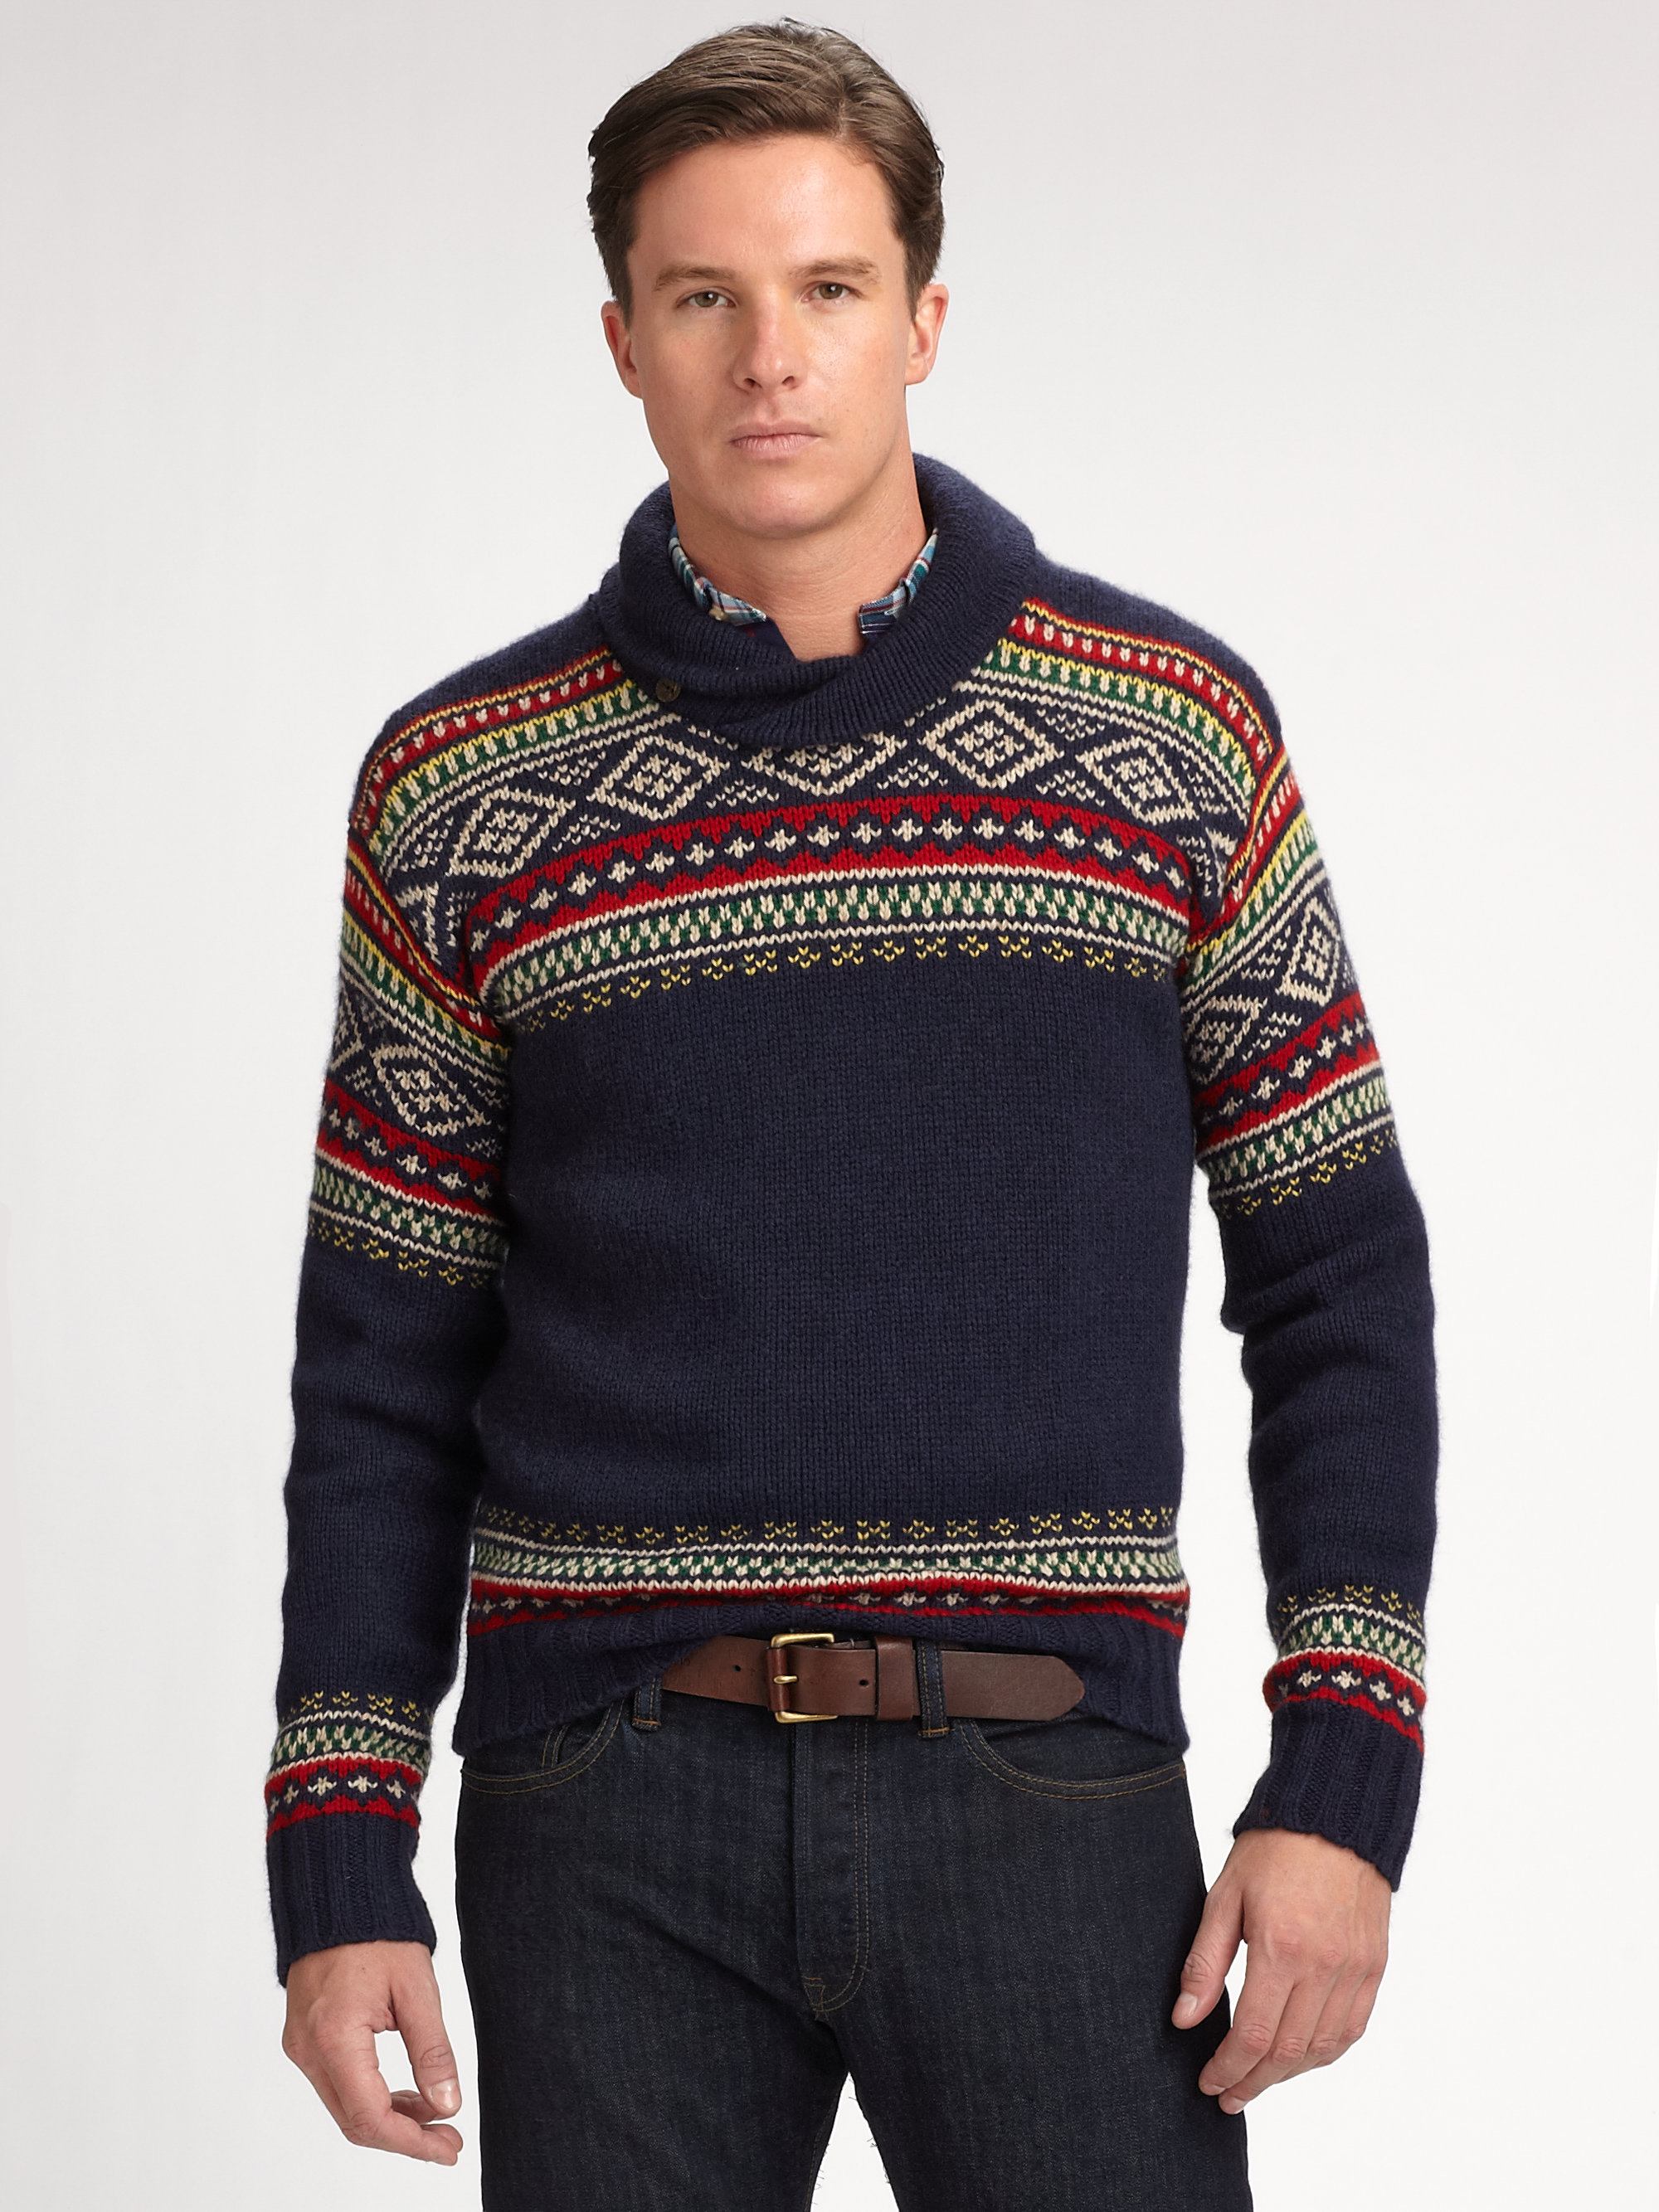 Lyst - Polo Ralph Lauren Woolcashmere Shawl Collar Sweater in Blue for Men